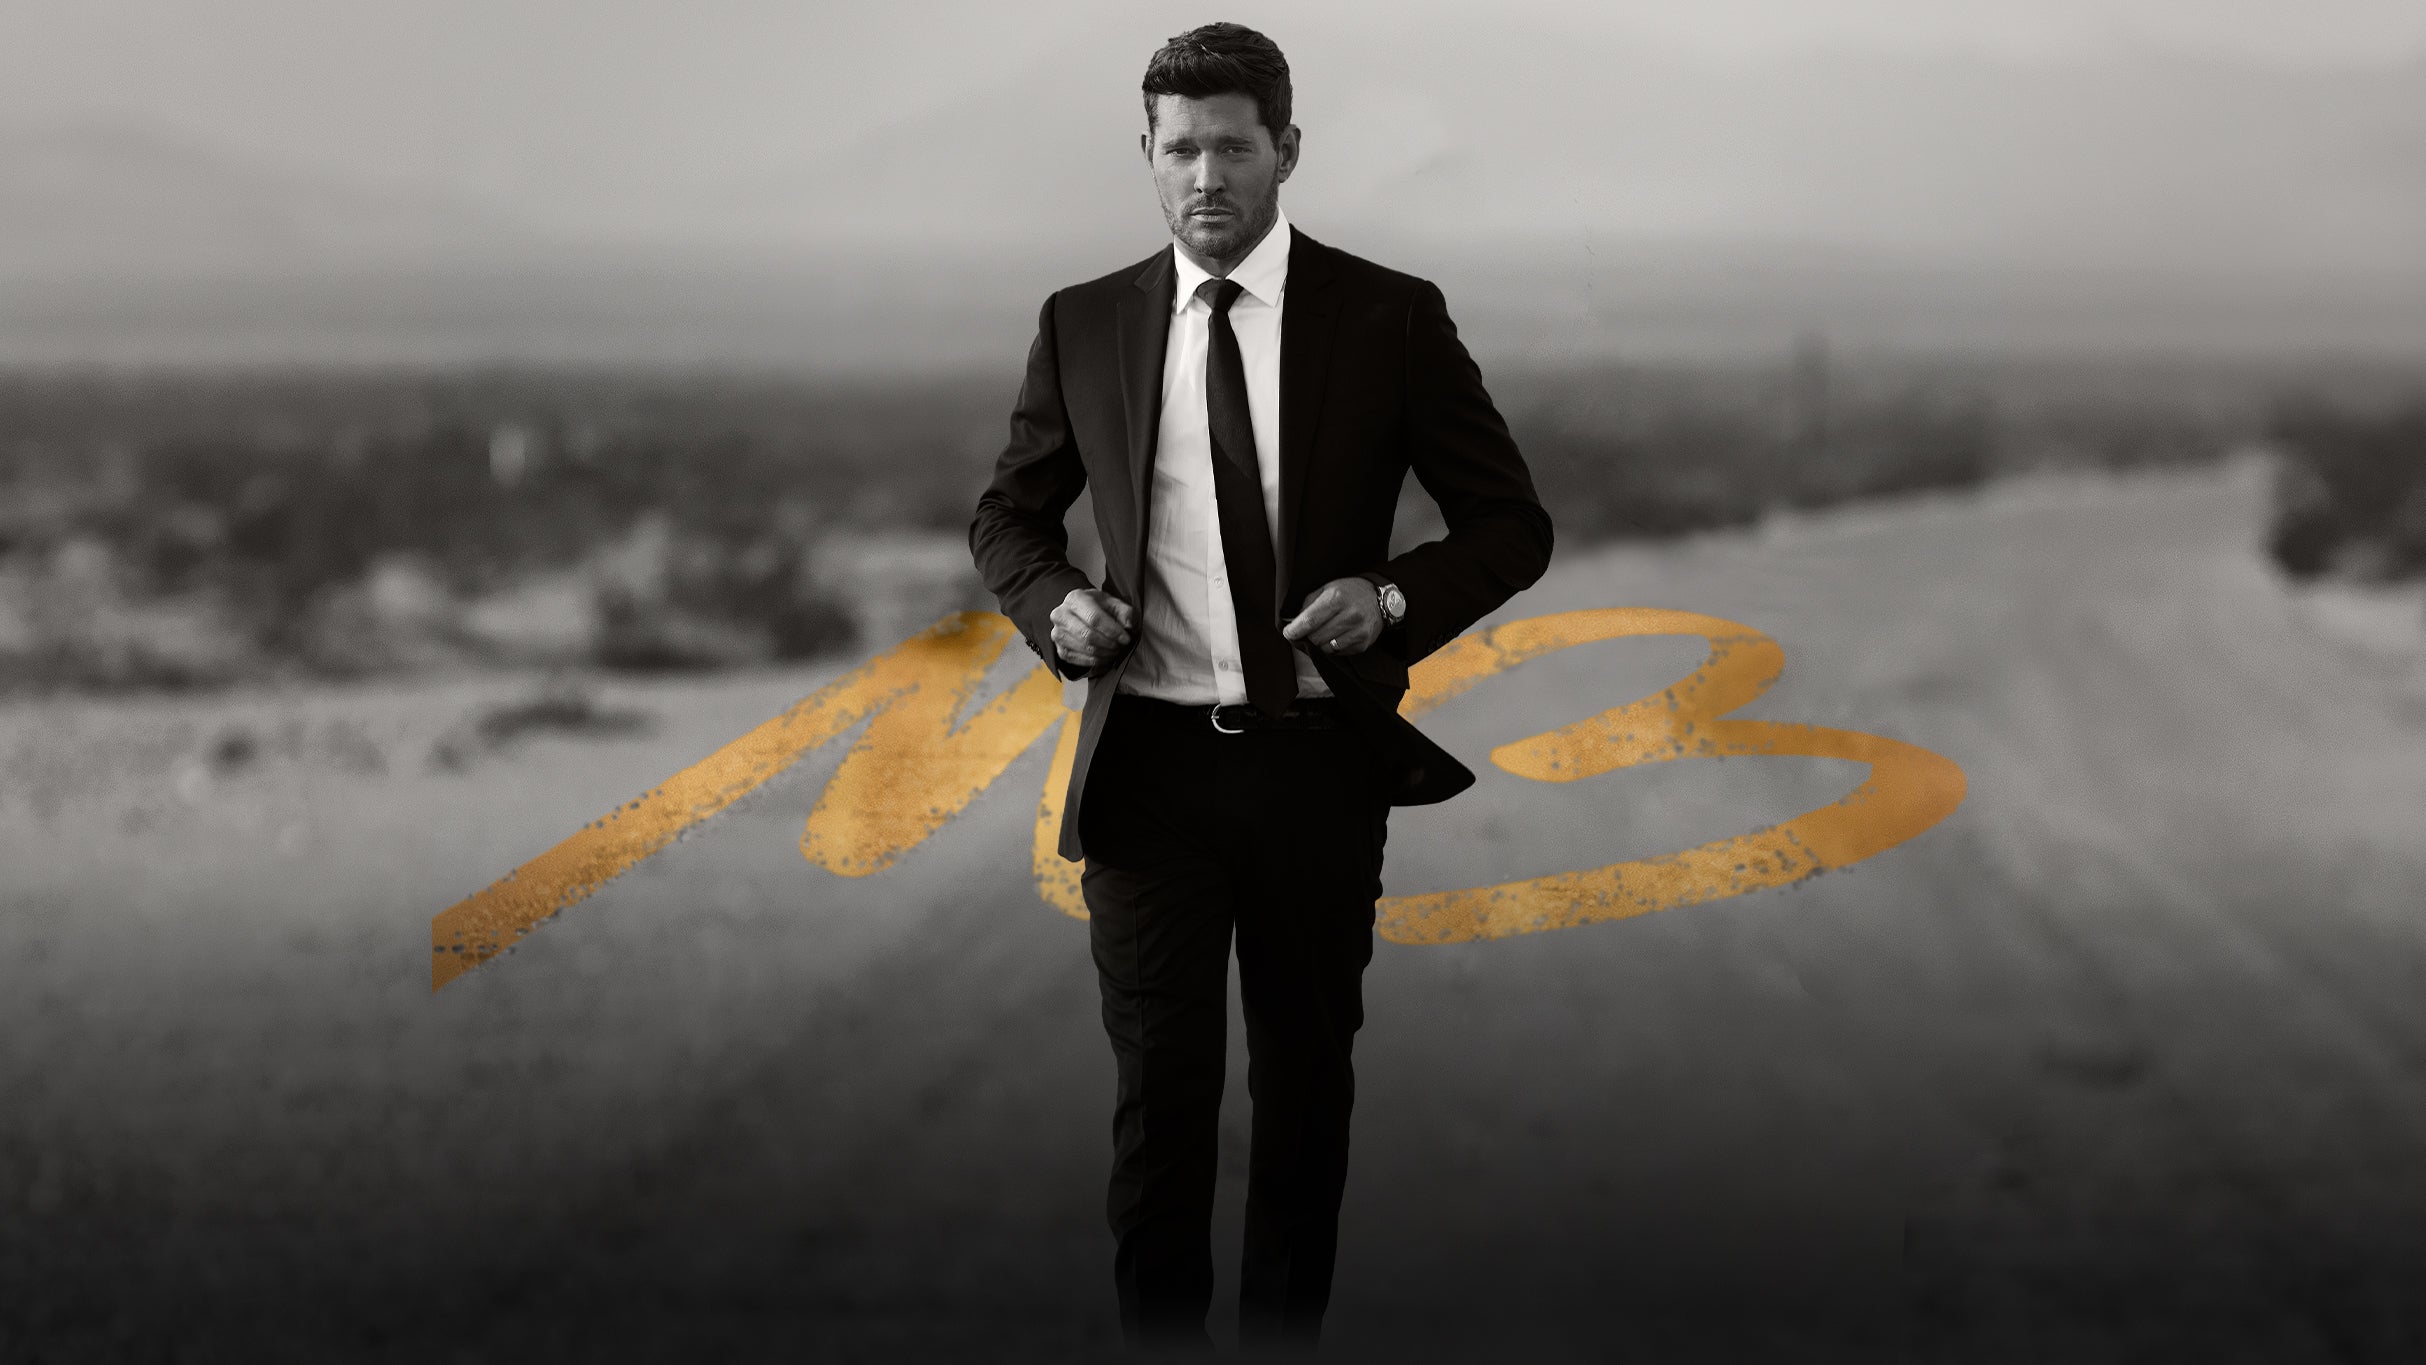 Michael Bublé in Niagara Falls promo photo for OLG Stage presale offer code